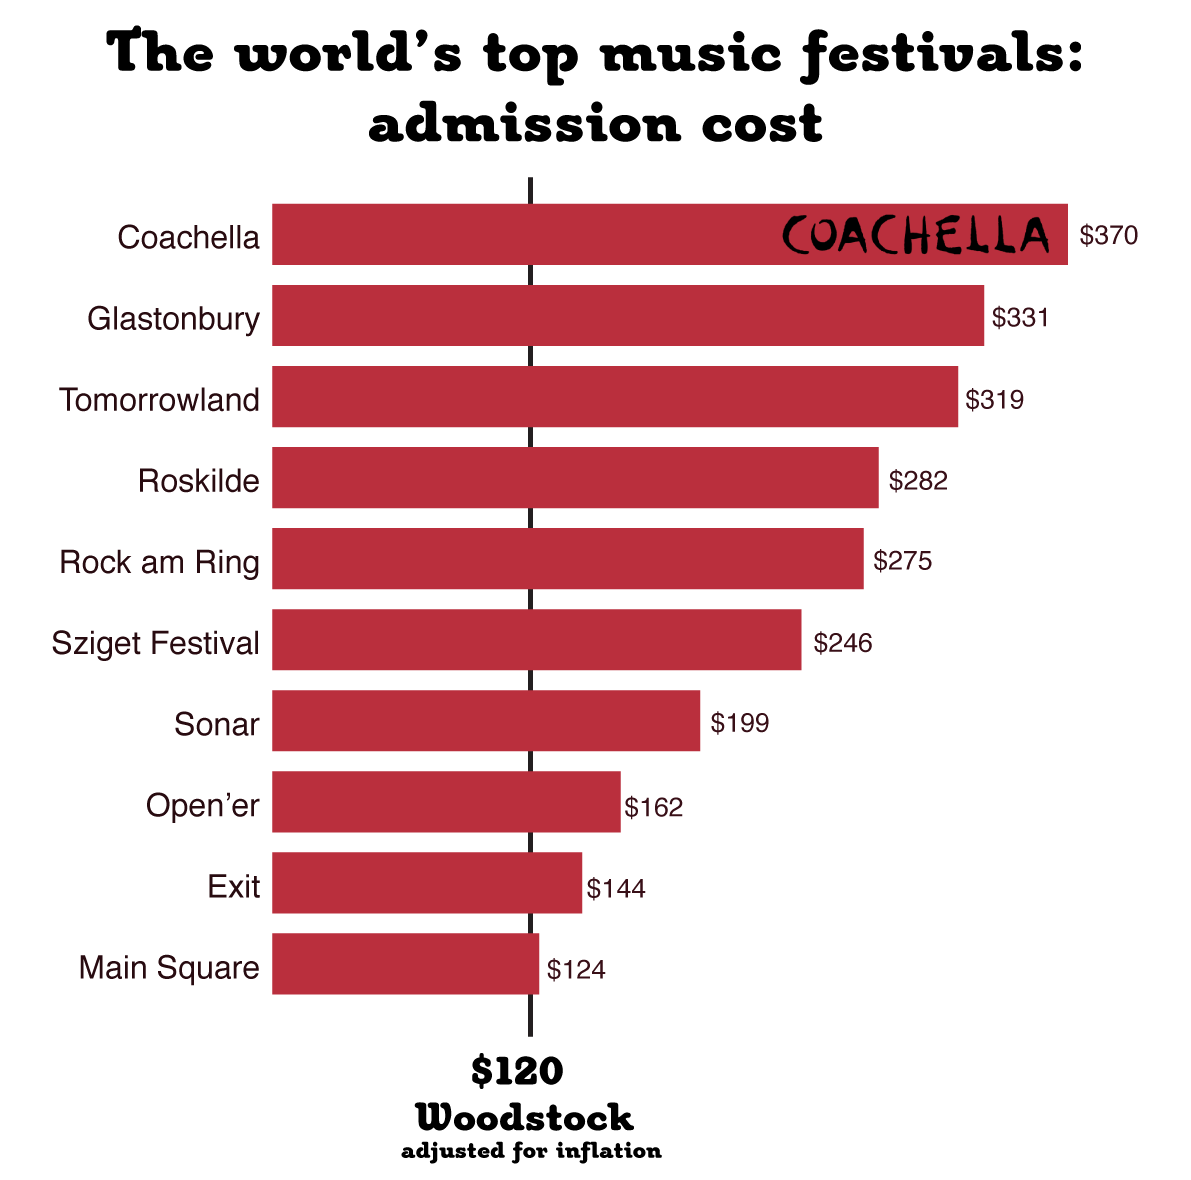 coachella-is-three-times-more-expensive-